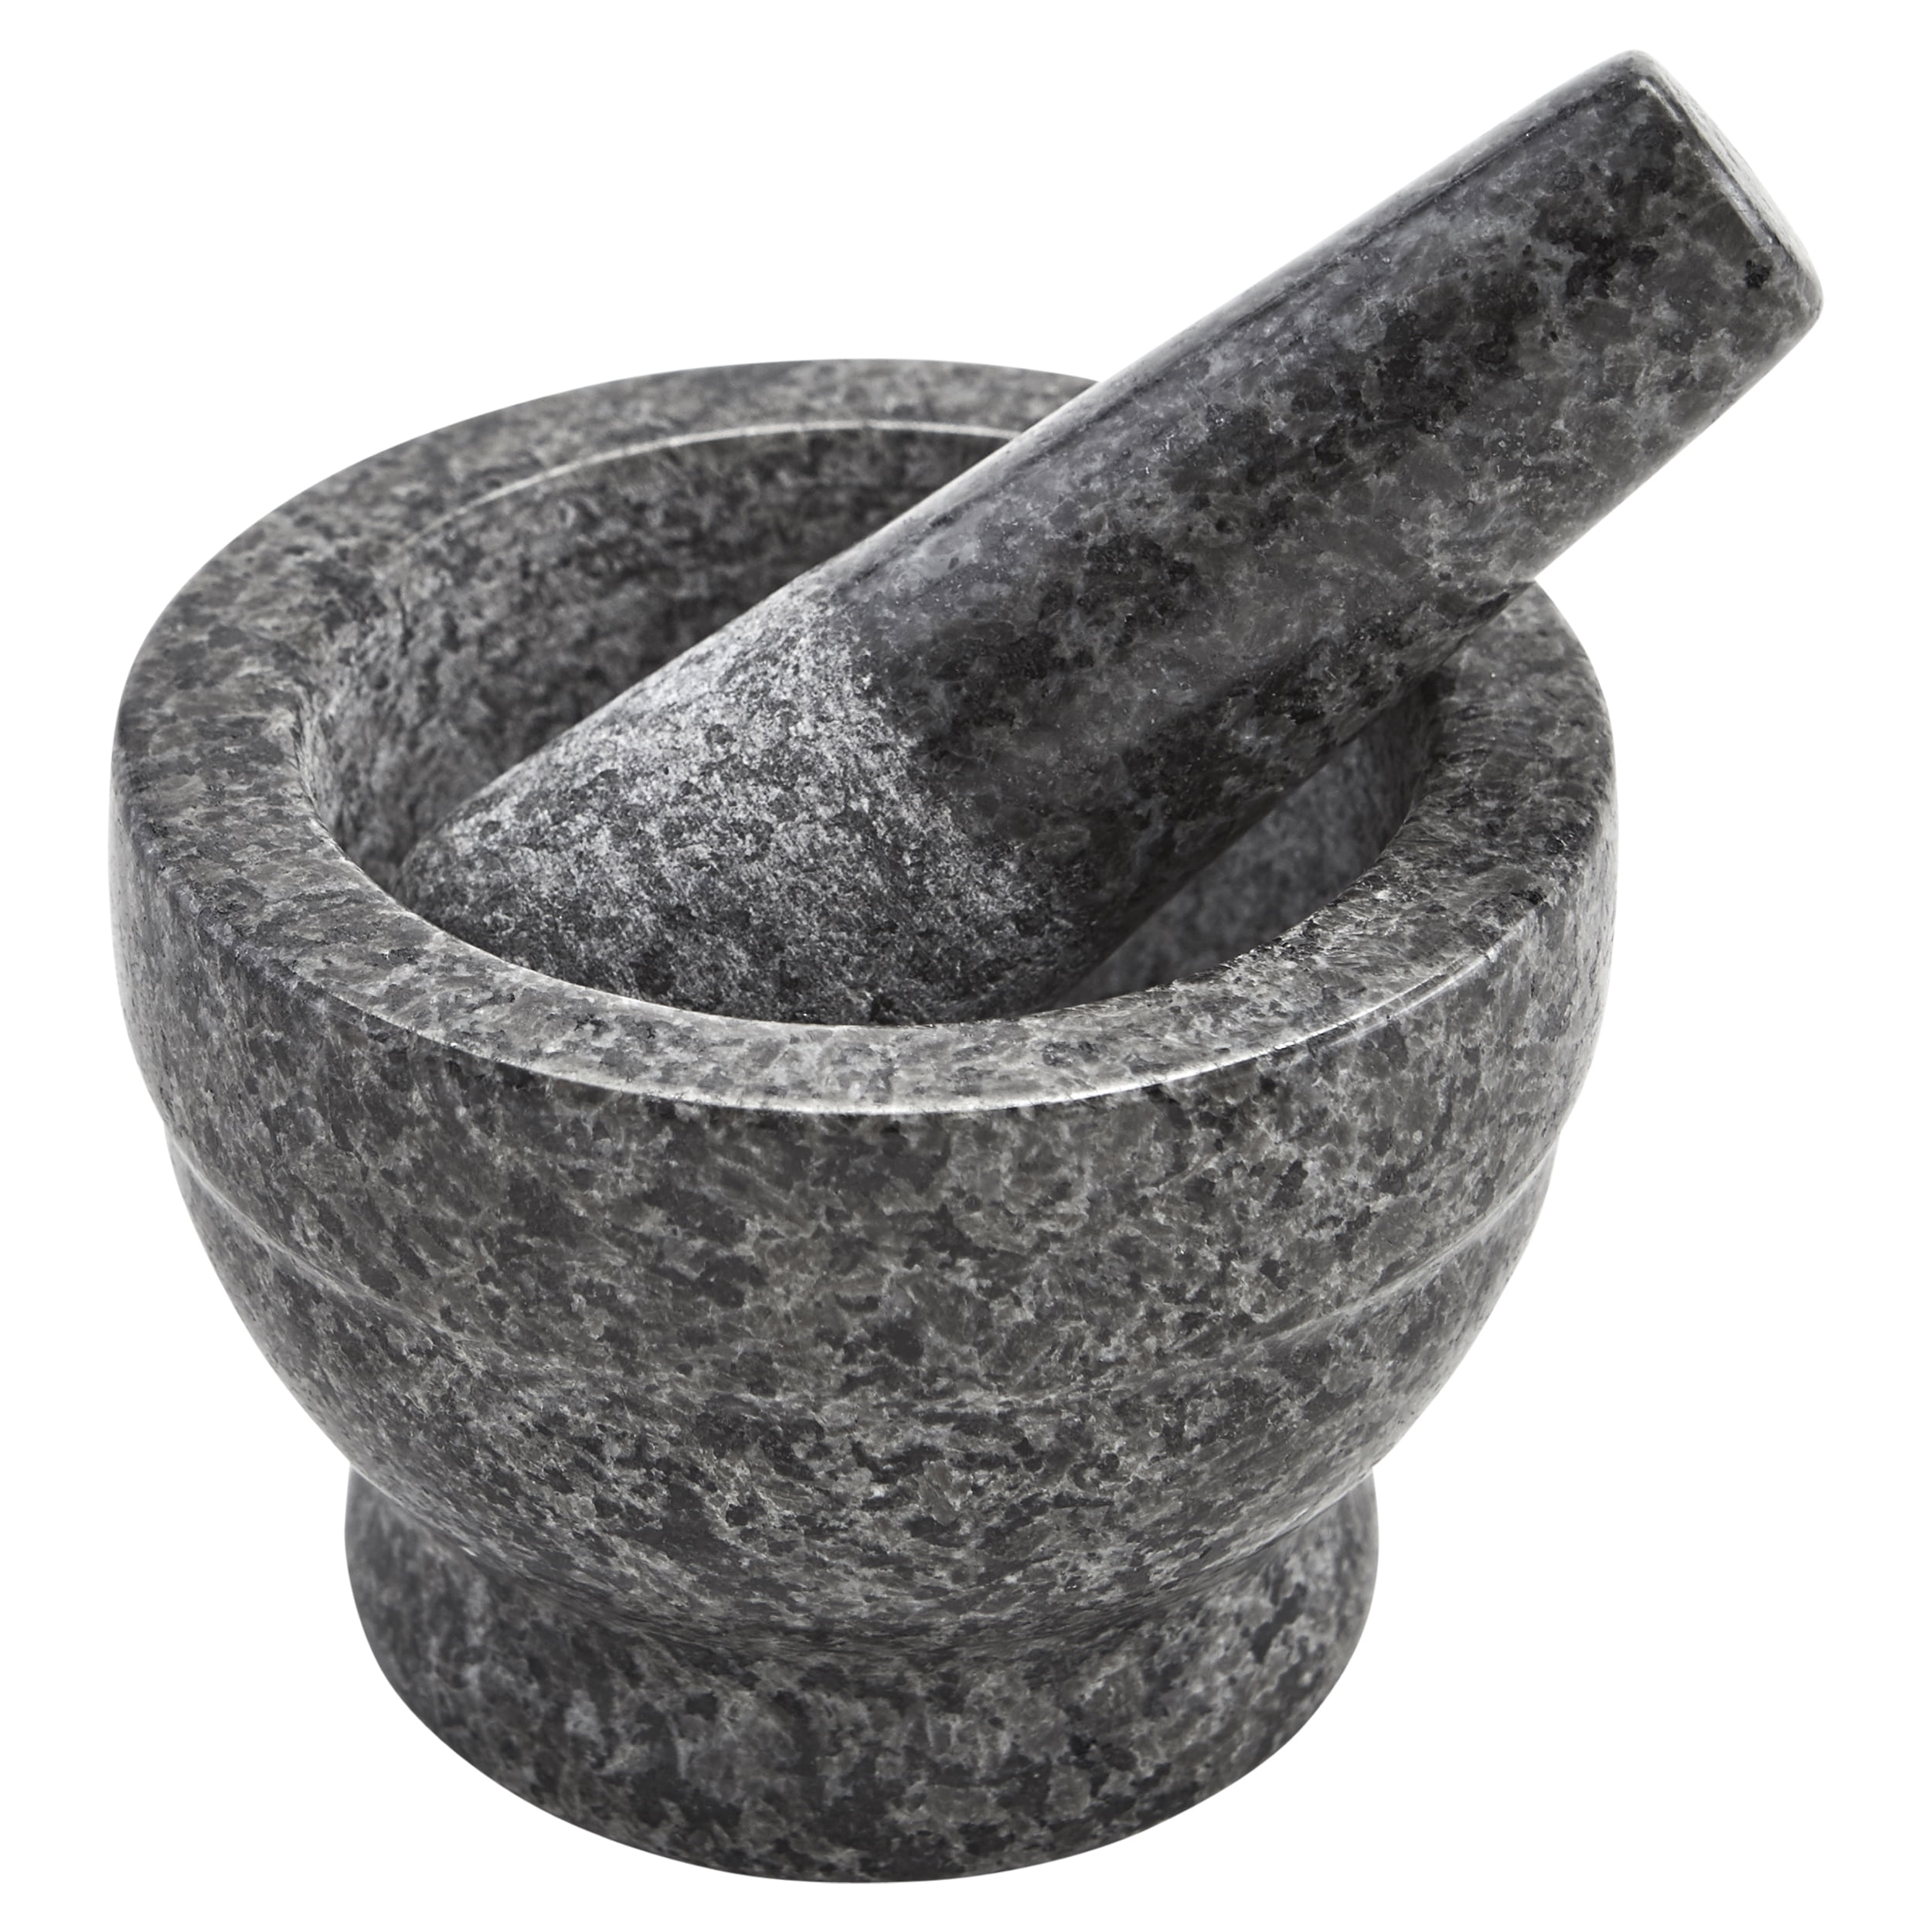 Imusa Wood Mortar with Pestle